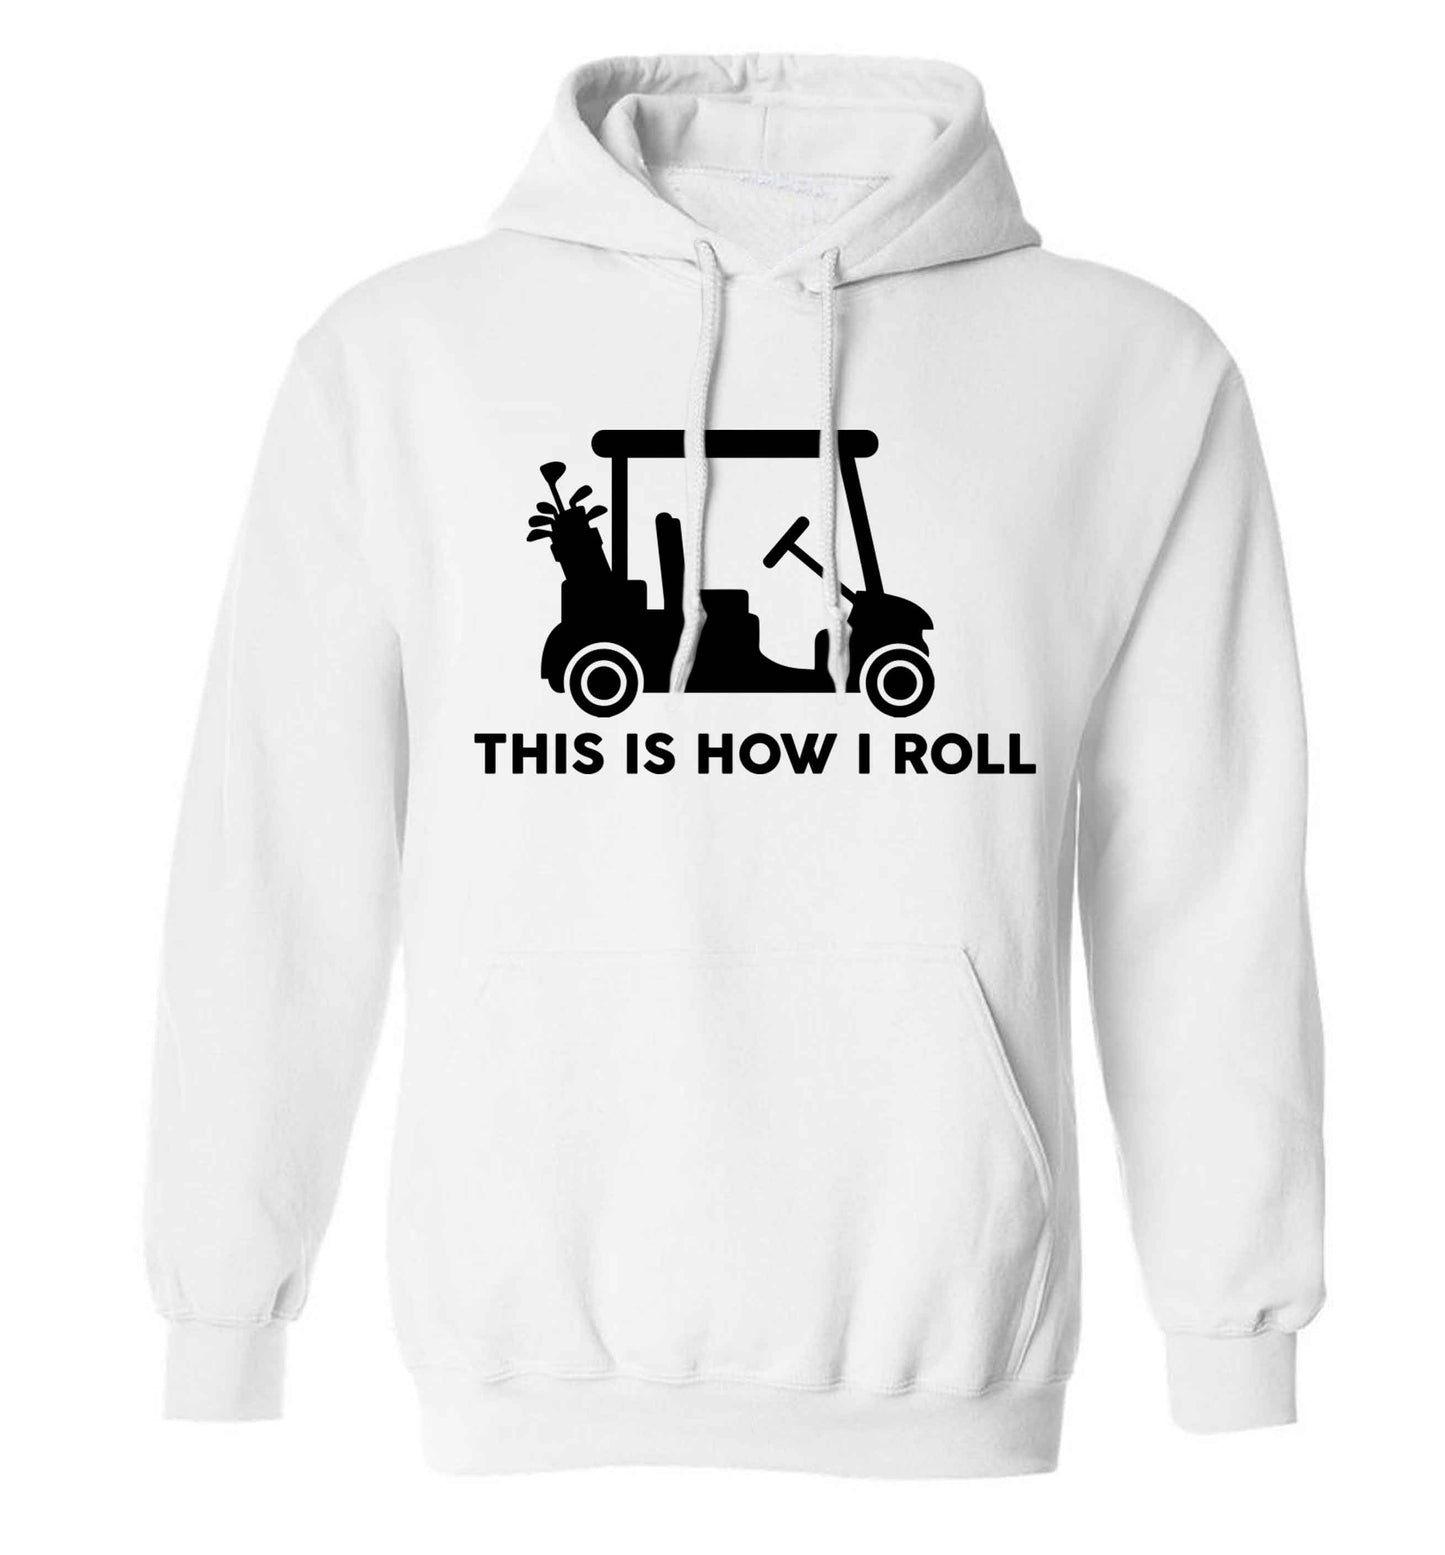 This is how I roll golf cart adults unisex white hoodie 2XL